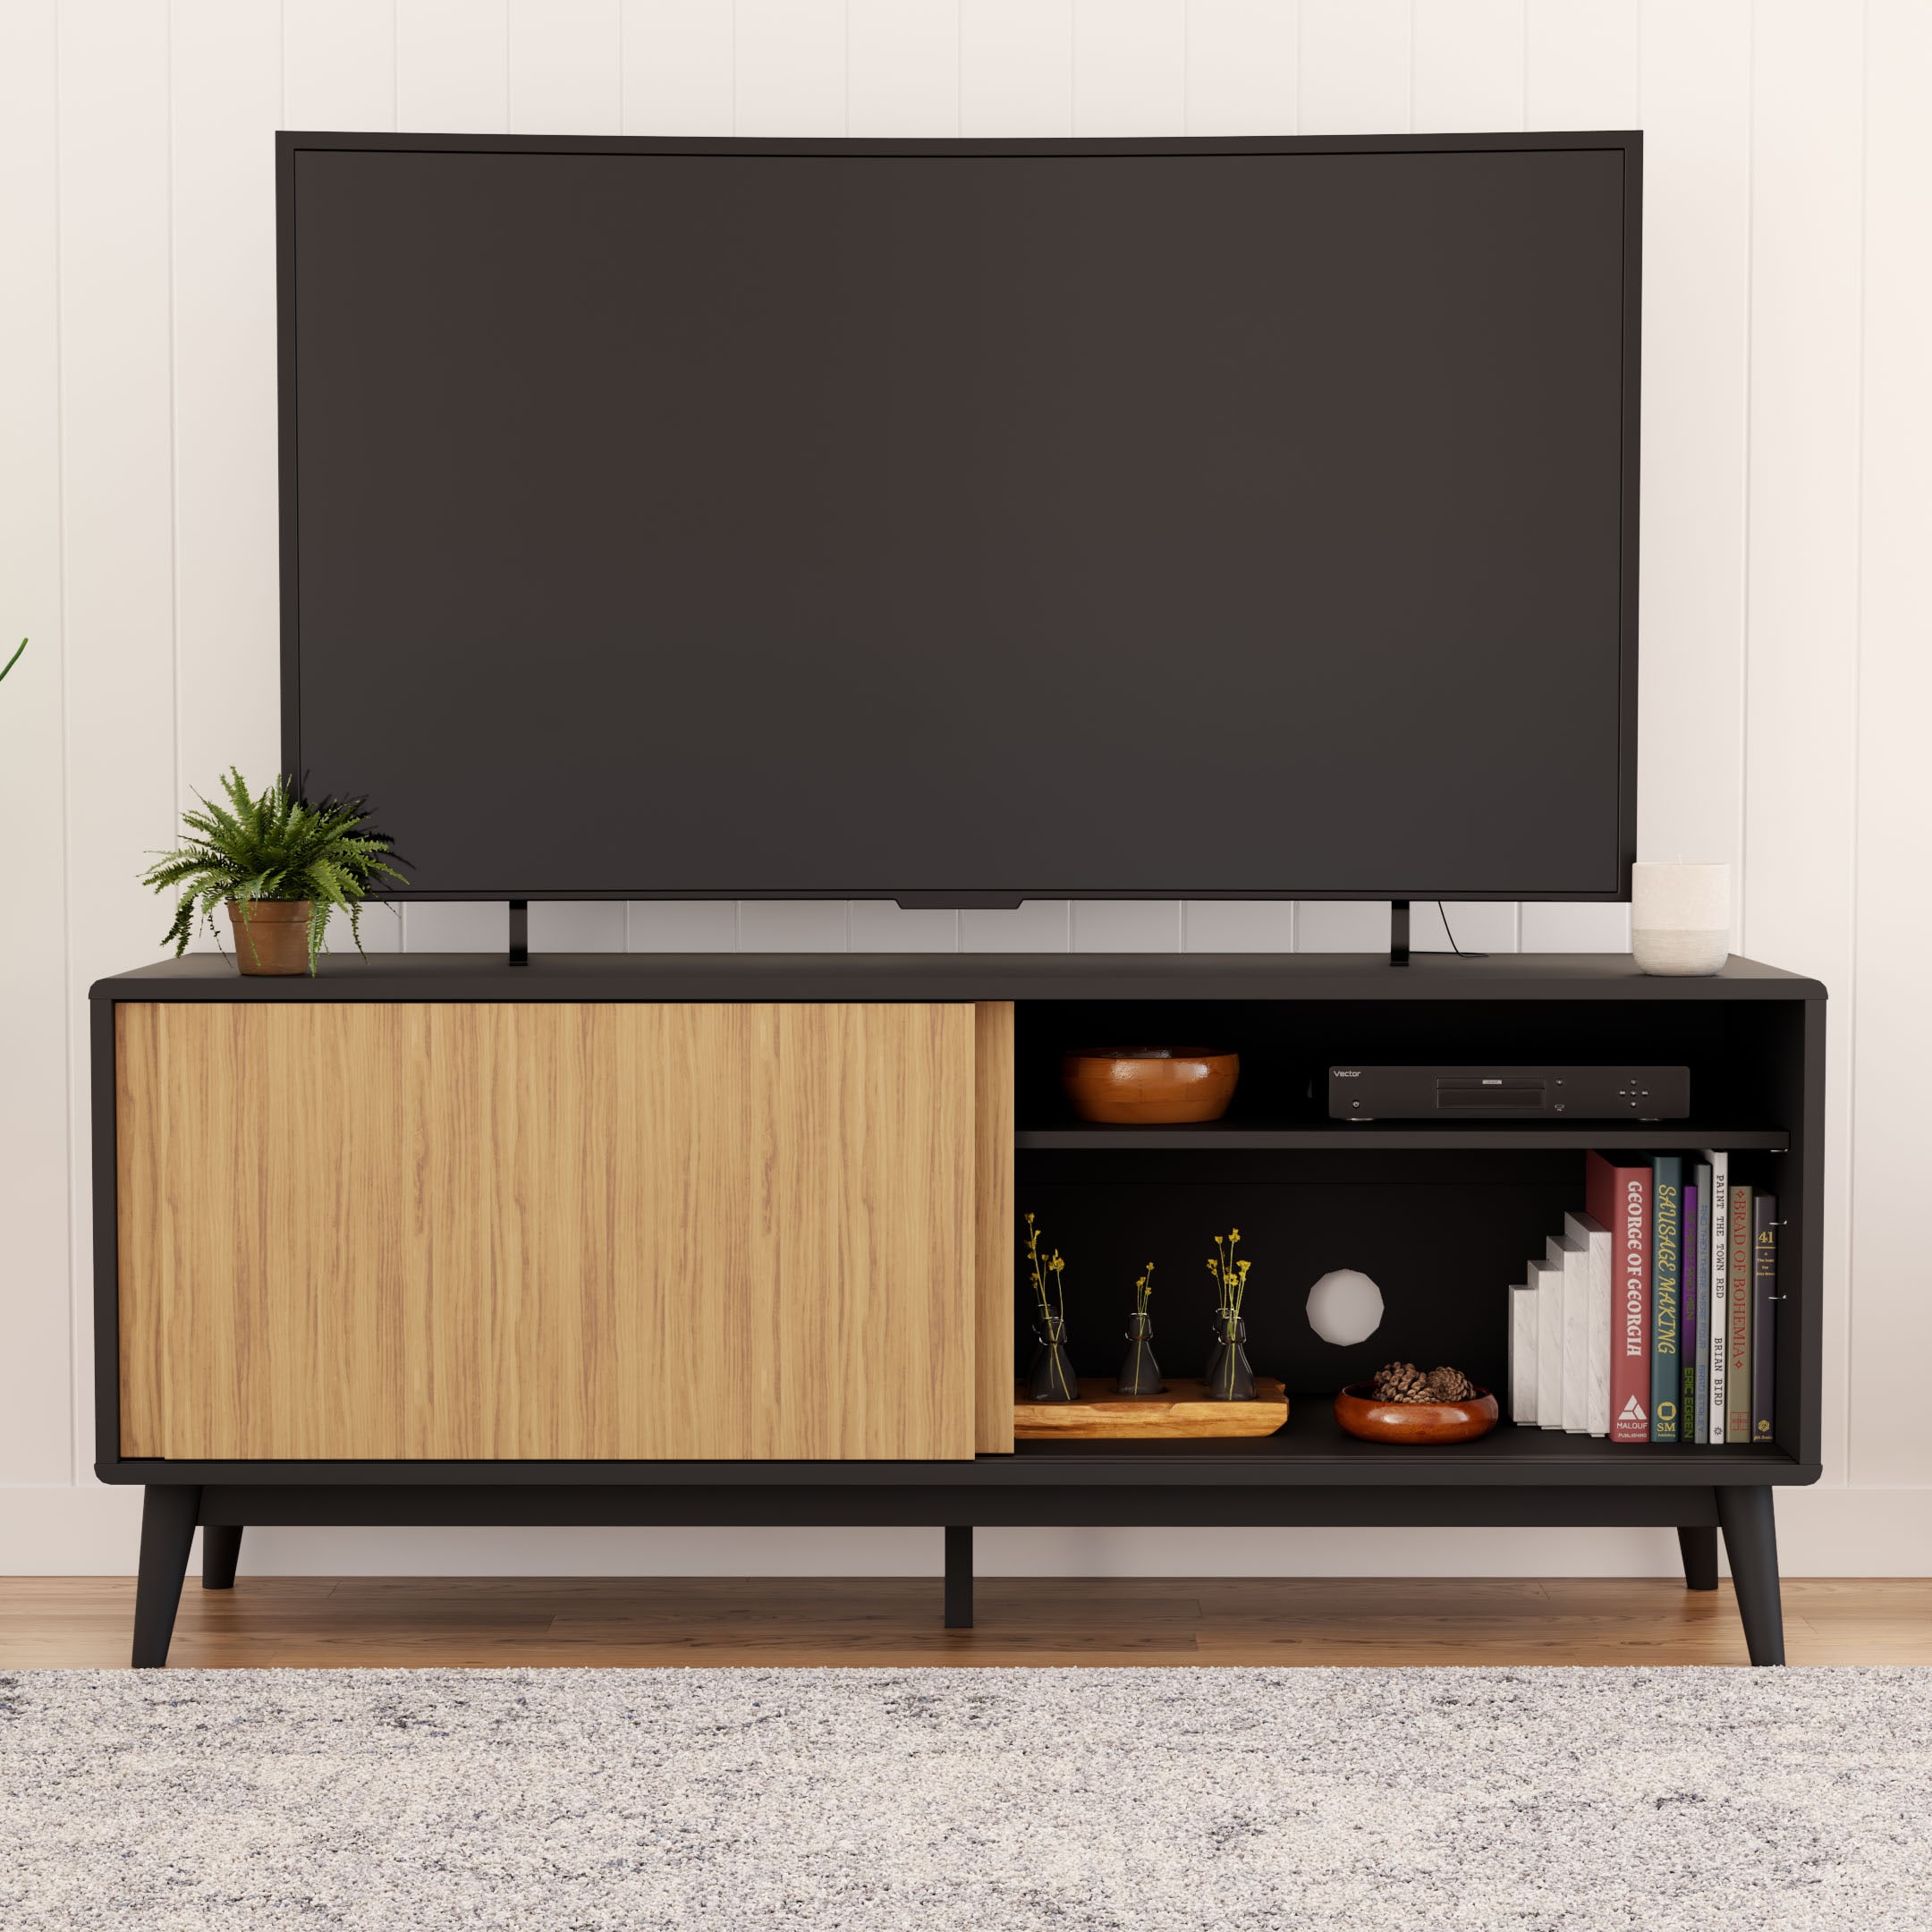 Brookside Madison Mid-Century Modern TV Stand Black and Oak at Lowes.com